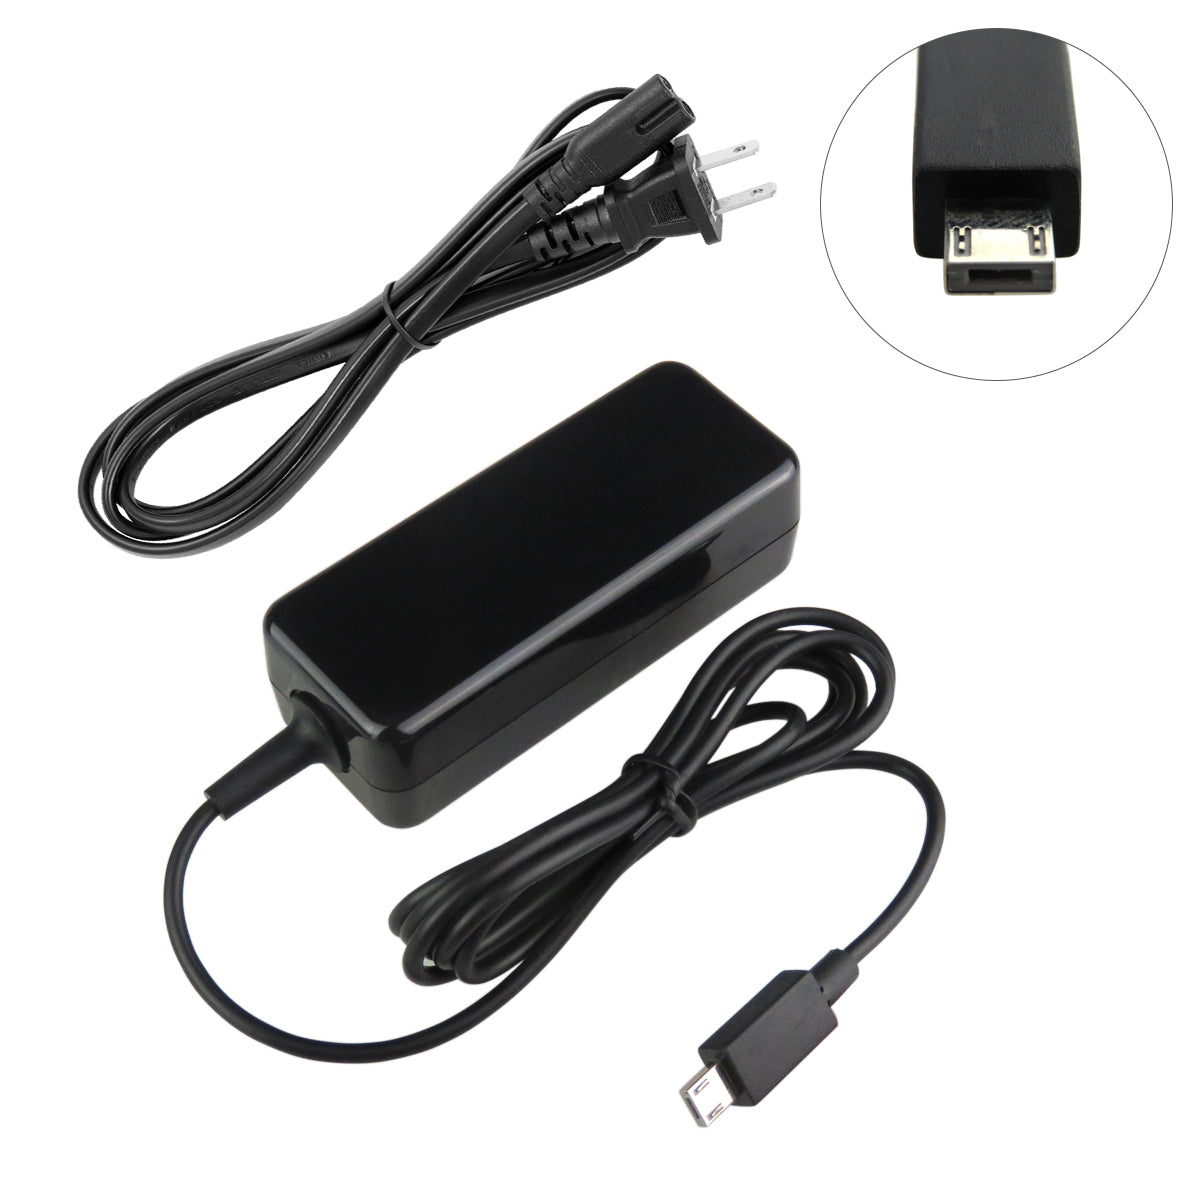 Charger for ASUS EeeBook X205TA-UH01 Laptop.